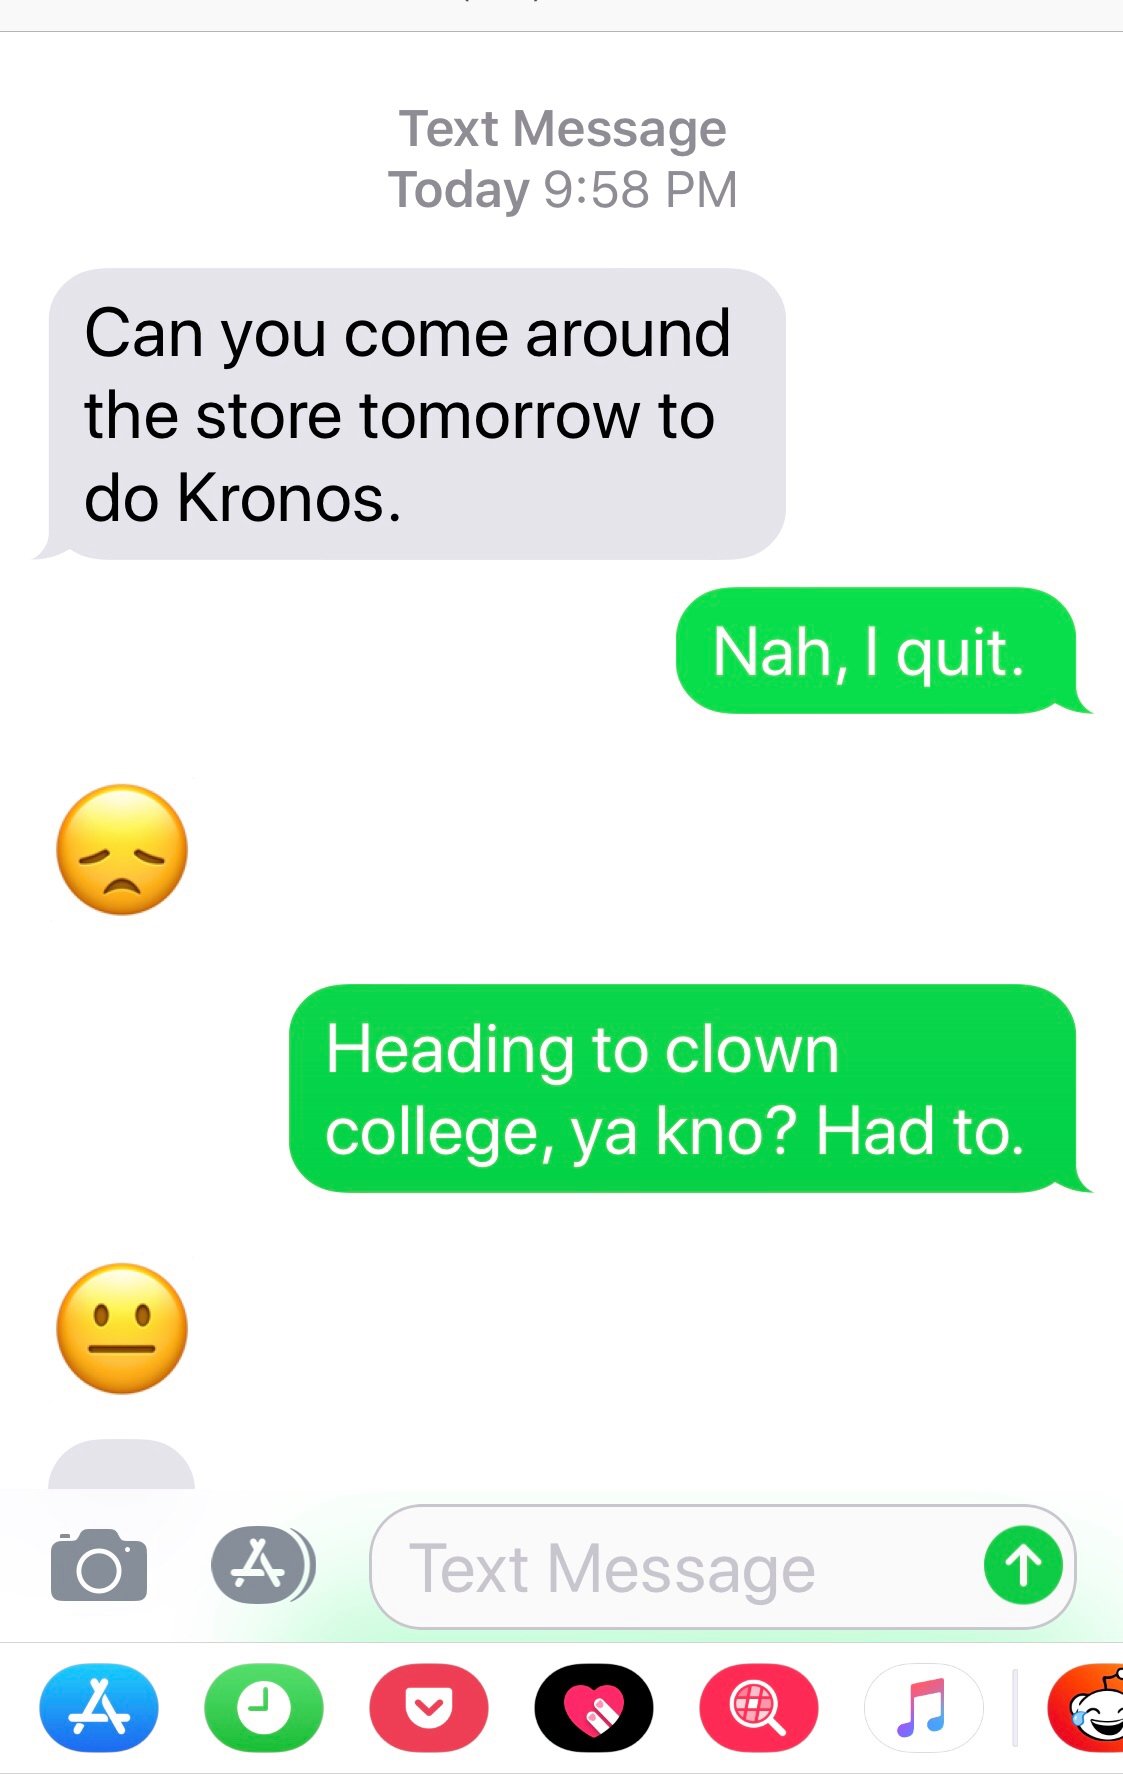 wrong number raw beauty kristi you re not my real dad - Text Message Today Can you come around the store tomorrow to do Kronos. Nah, I quit. Heading to clown college, ya kno? Had to. o A Text Message 0 A O O O Q